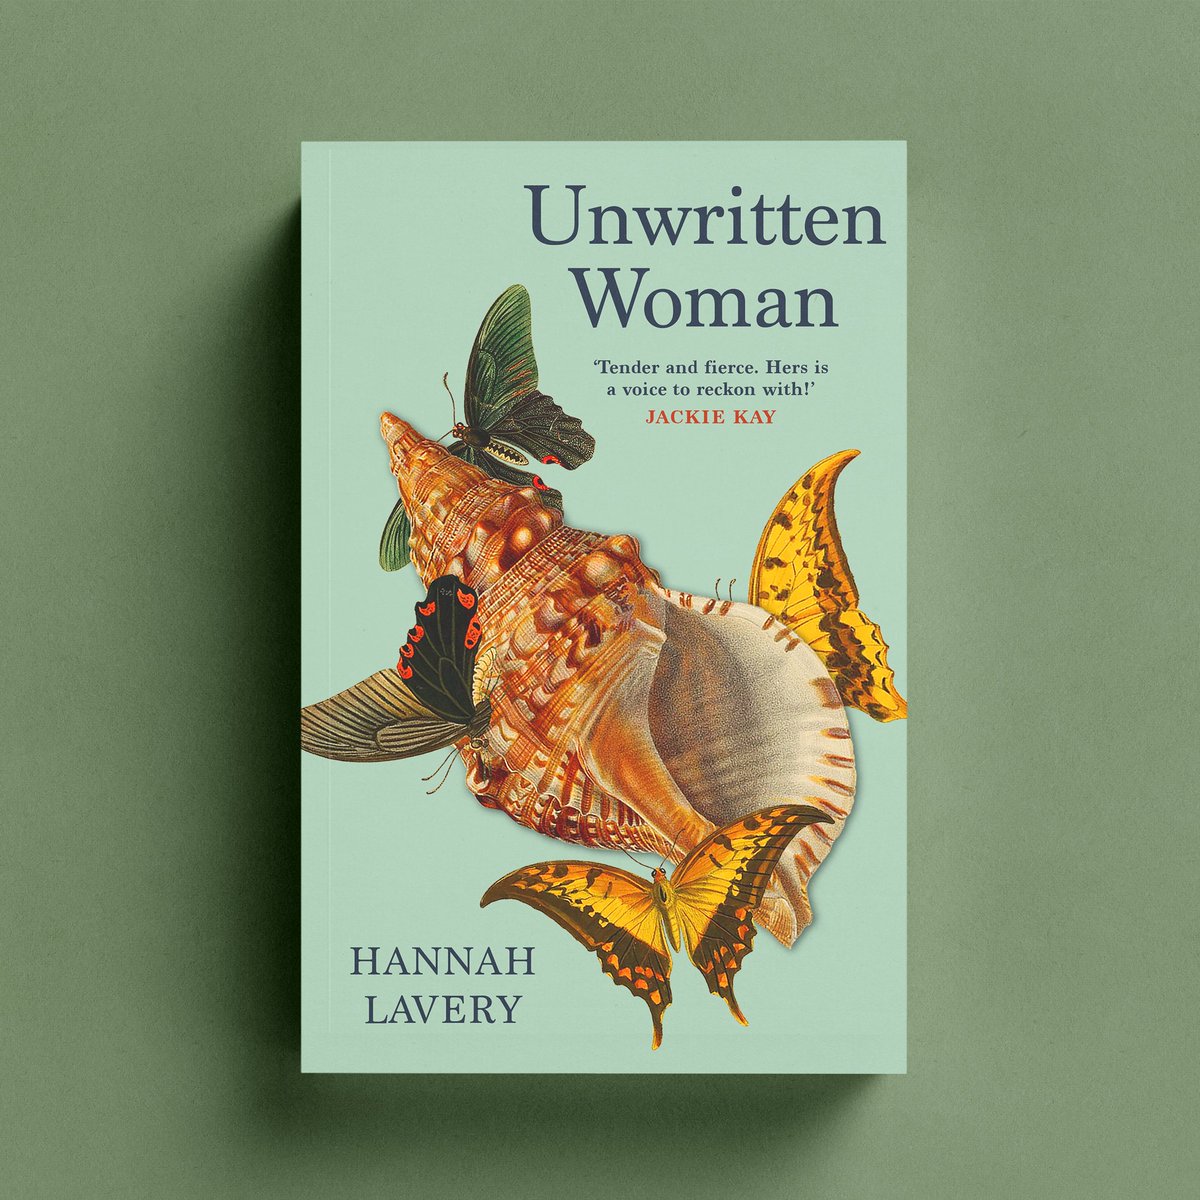 We are delighted to reveal the cover of @HanLavery forthcoming poetry collection Unwritten Woman, publishing on 1st August. Unwritten Woman is a bold and lavish call for us to see the woman in the stories we read and tell ourselves. Pre-order here: birlinn.co.uk/product/unwrit…